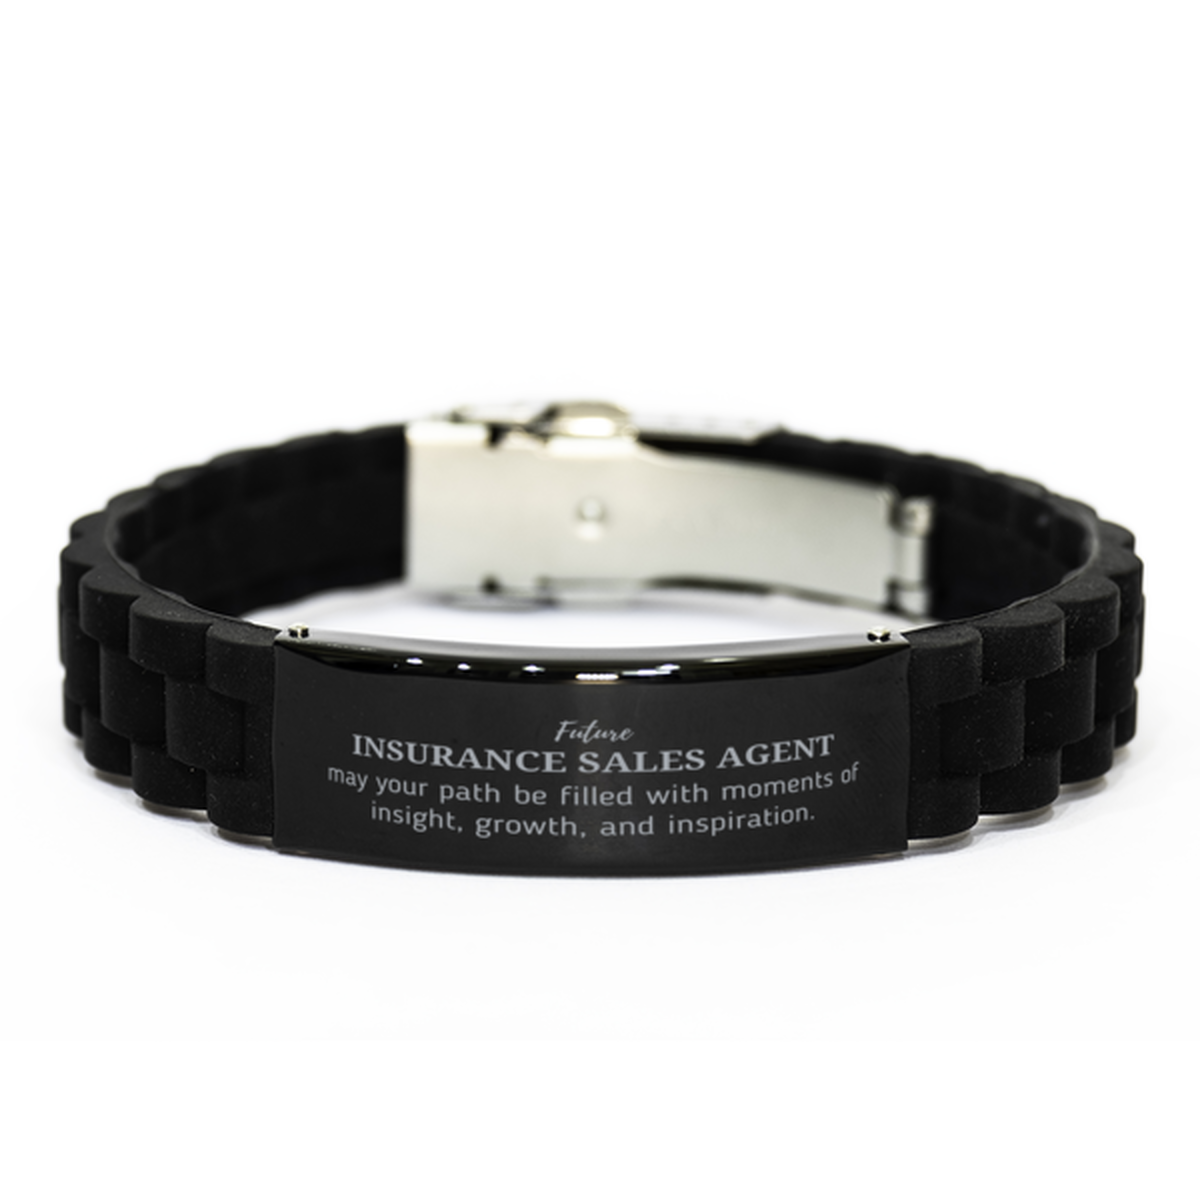 Future Insurance Sales Agent Gifts, May your path be filled with moments of insight, Graduation Gifts for New Insurance Sales Agent, Christmas Unique Black Glidelock Clasp Bracelet For Men, Women, Friends